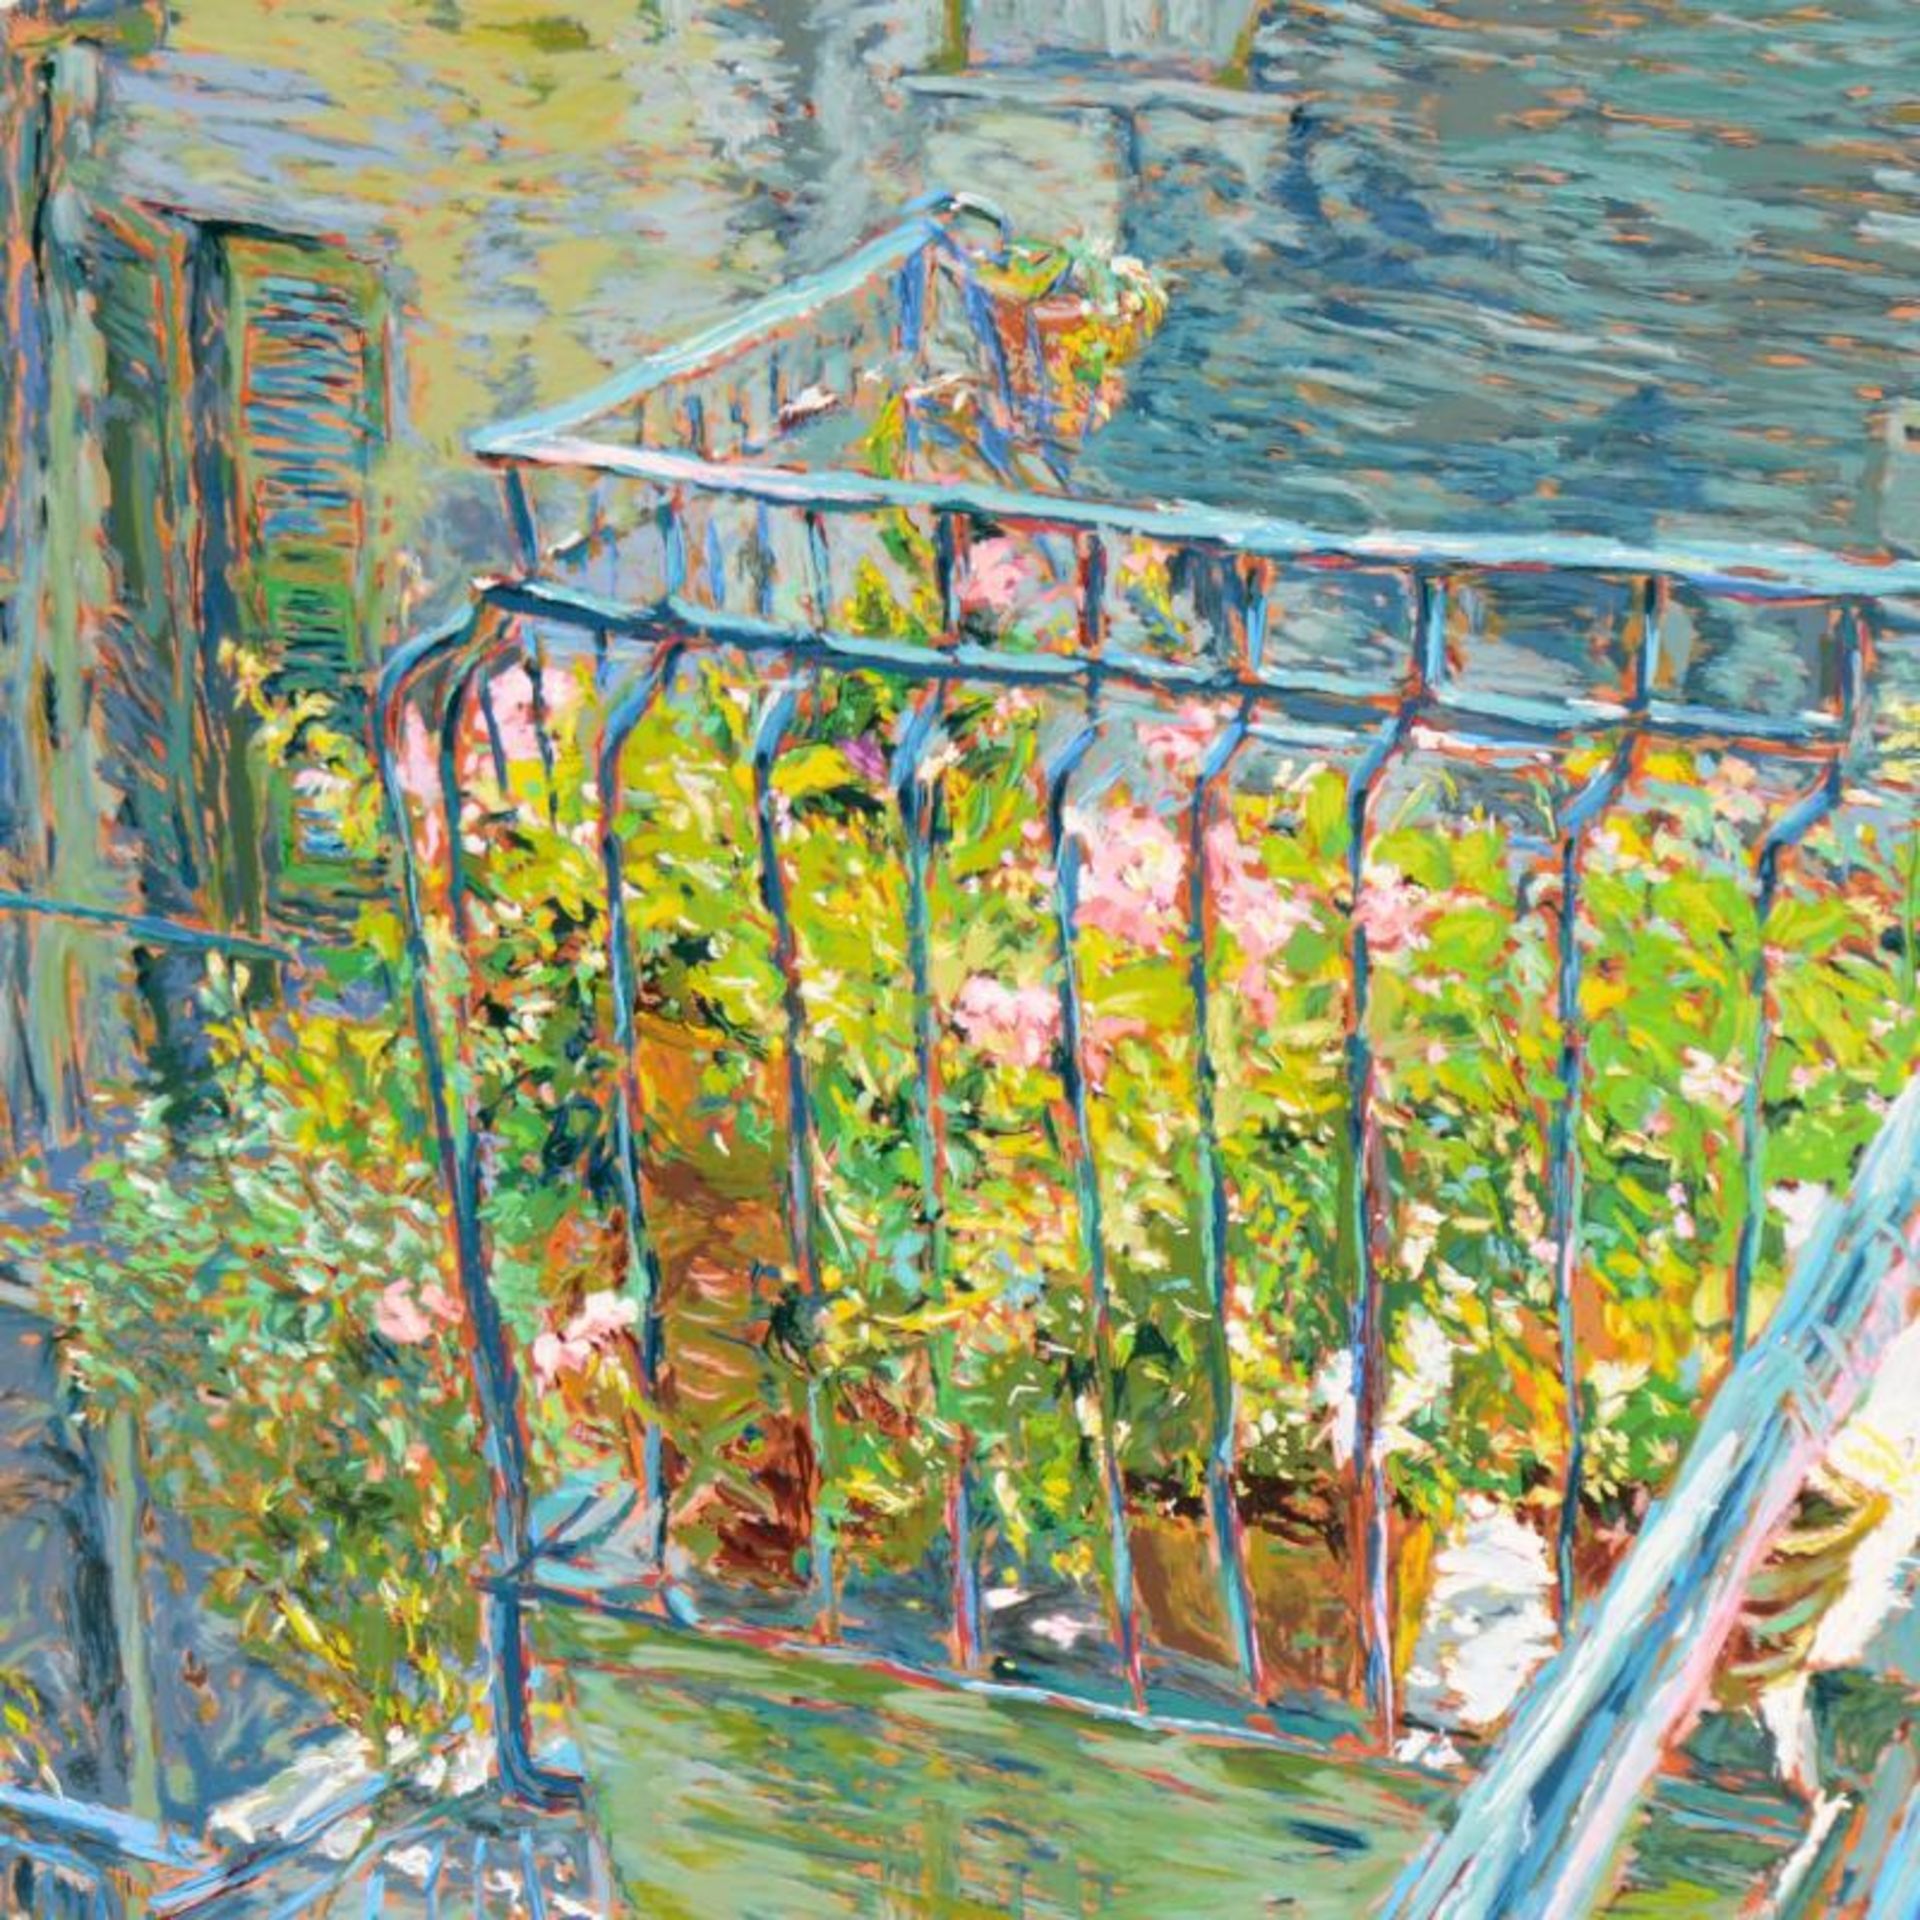 Le Balcon Blueae by Sassone, Marco - Image 2 of 2